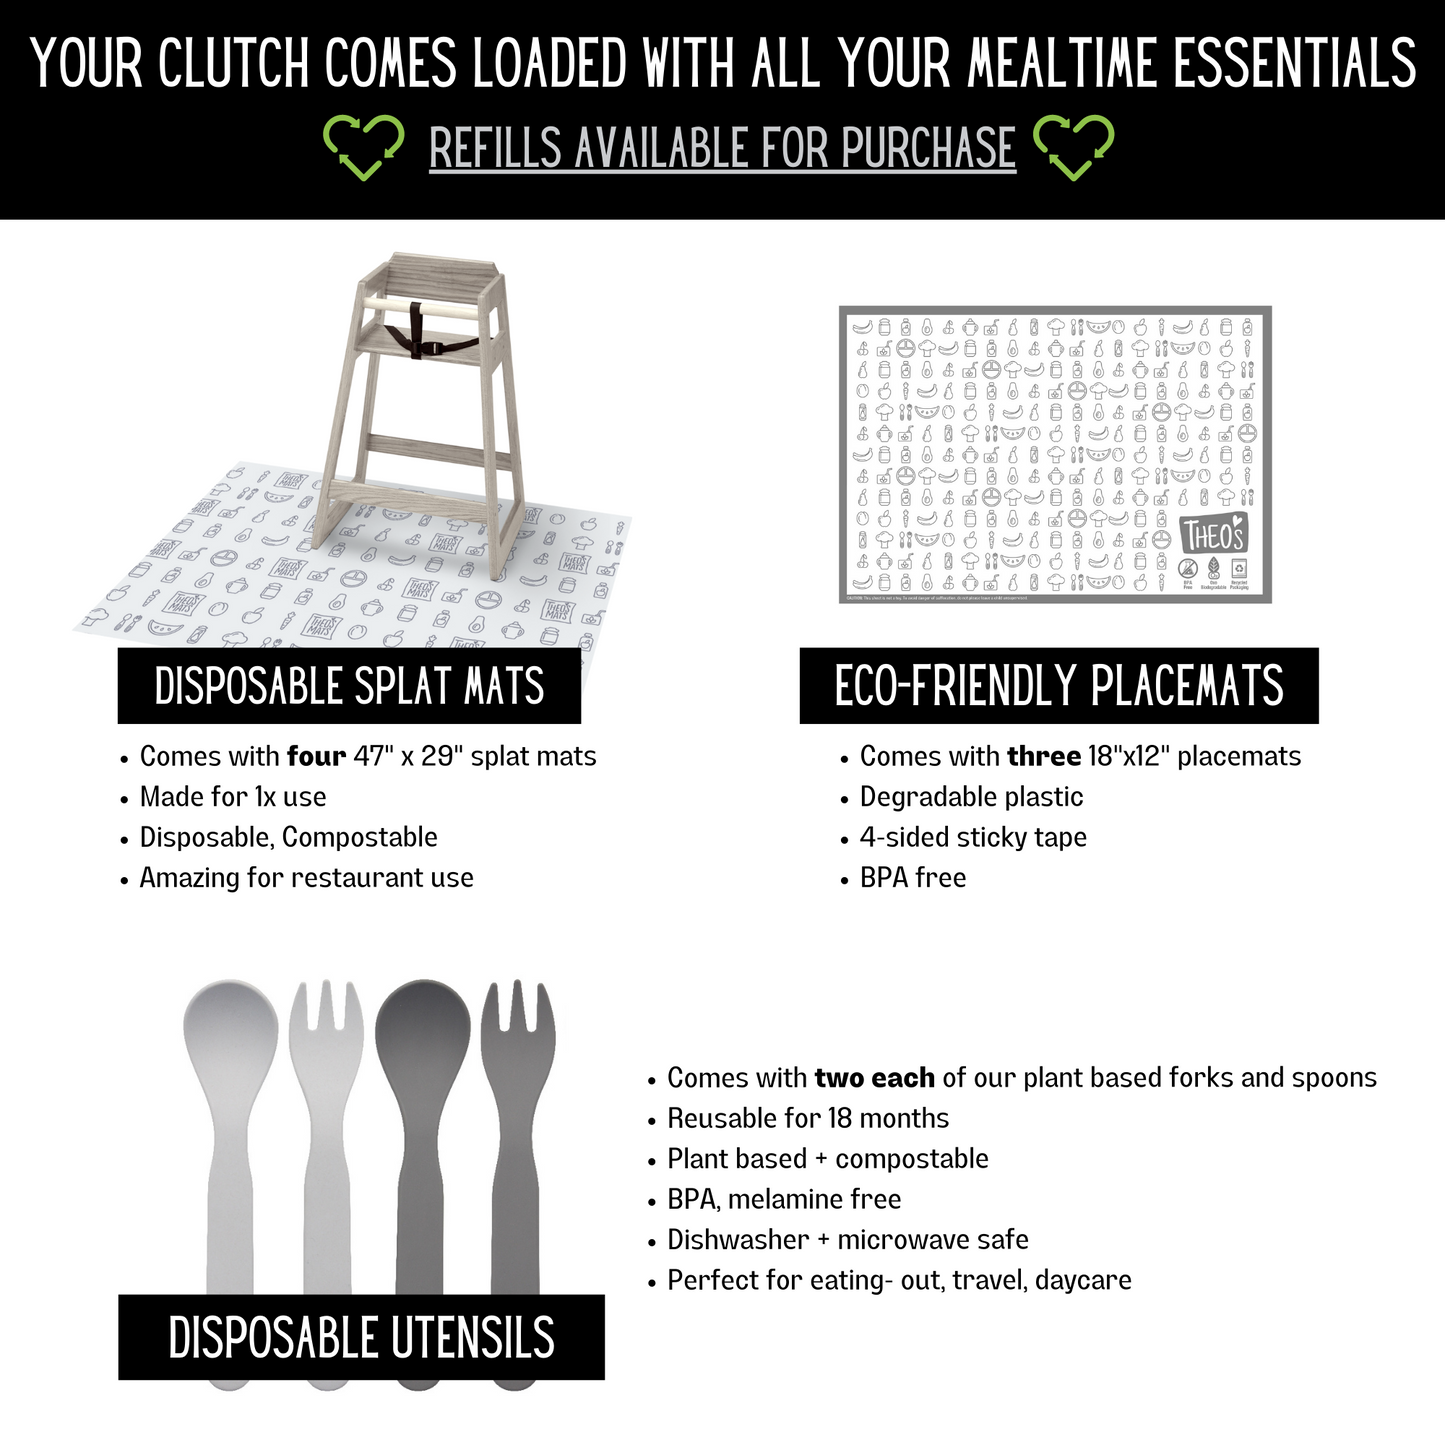 Loaded Clutch | 4 Disposable Splat Mats, 3 Stick On Placemats, 2 Spoons & 2 Forks